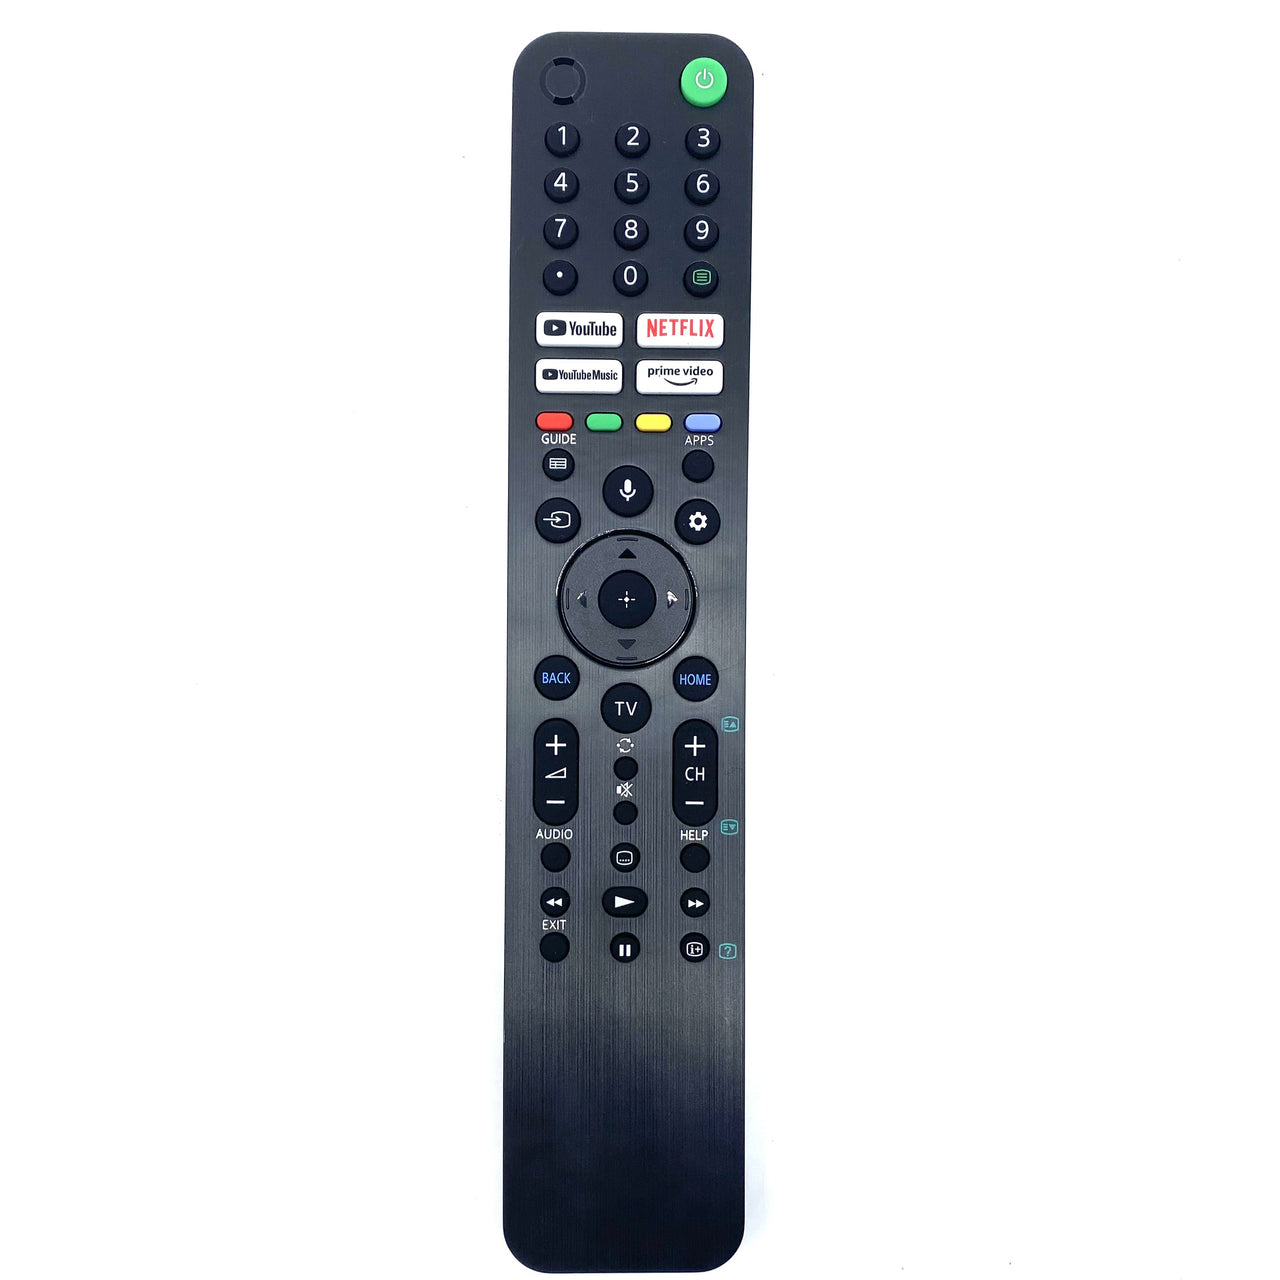 RMF-TX520P Replacement Remote for Sony Televisions